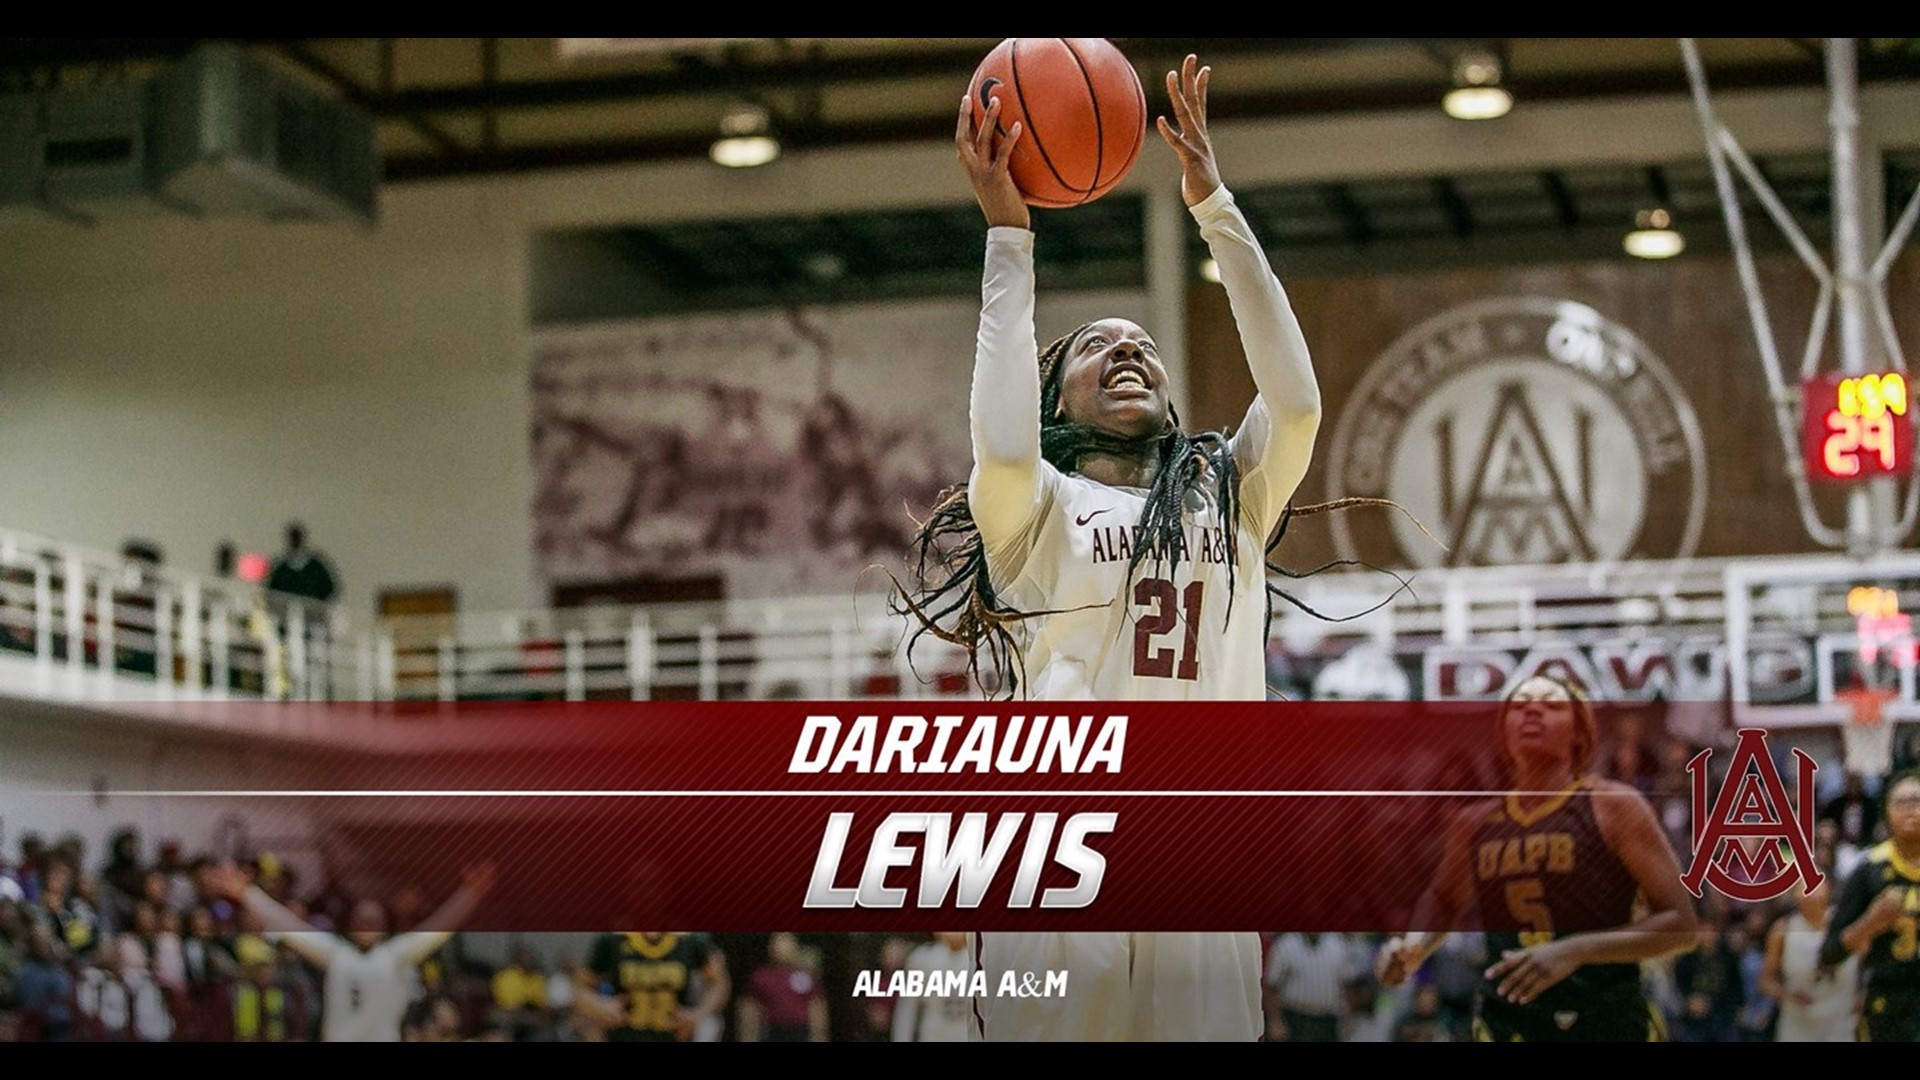 The Southwestern Athletic Conference has named Alabama A&M’s Dariauna Lewis its SWAC Women’s Basketball Player of the Week after producing a double-double on Monday.